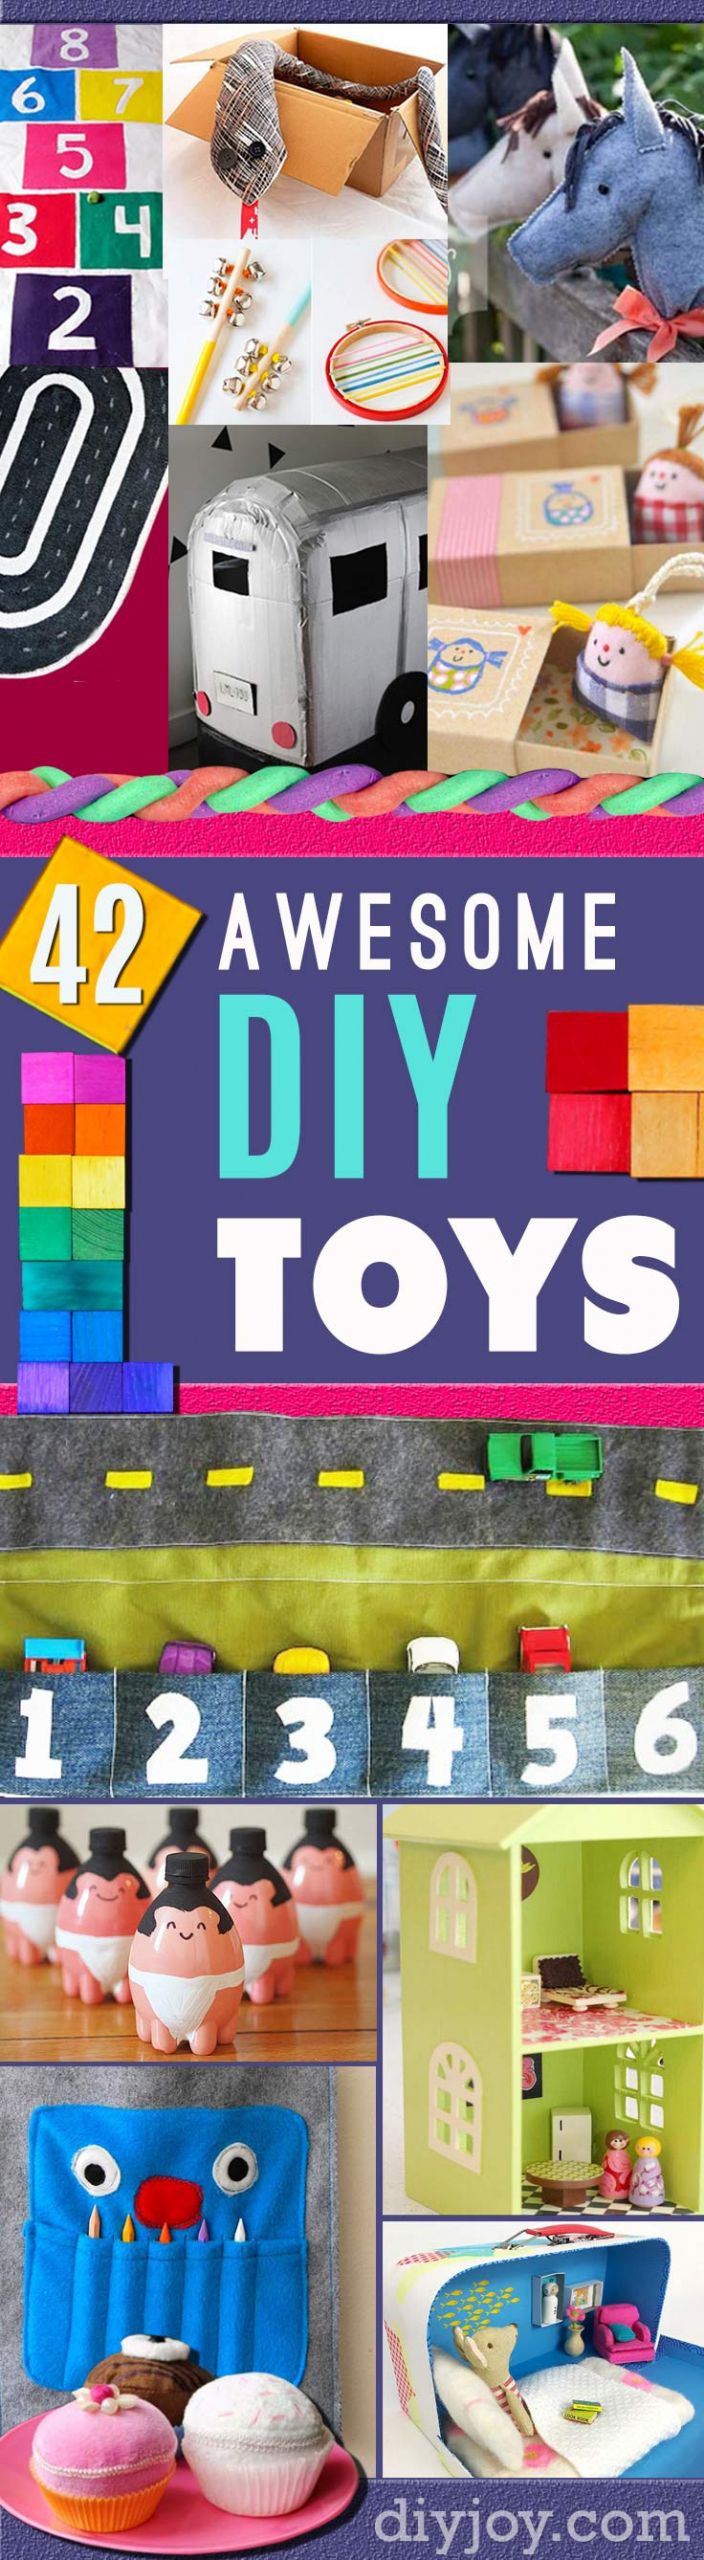 Cool Gift Ideas For Kids
 41 Fun DIY Gifts to Make For Kids Perfect Homemade